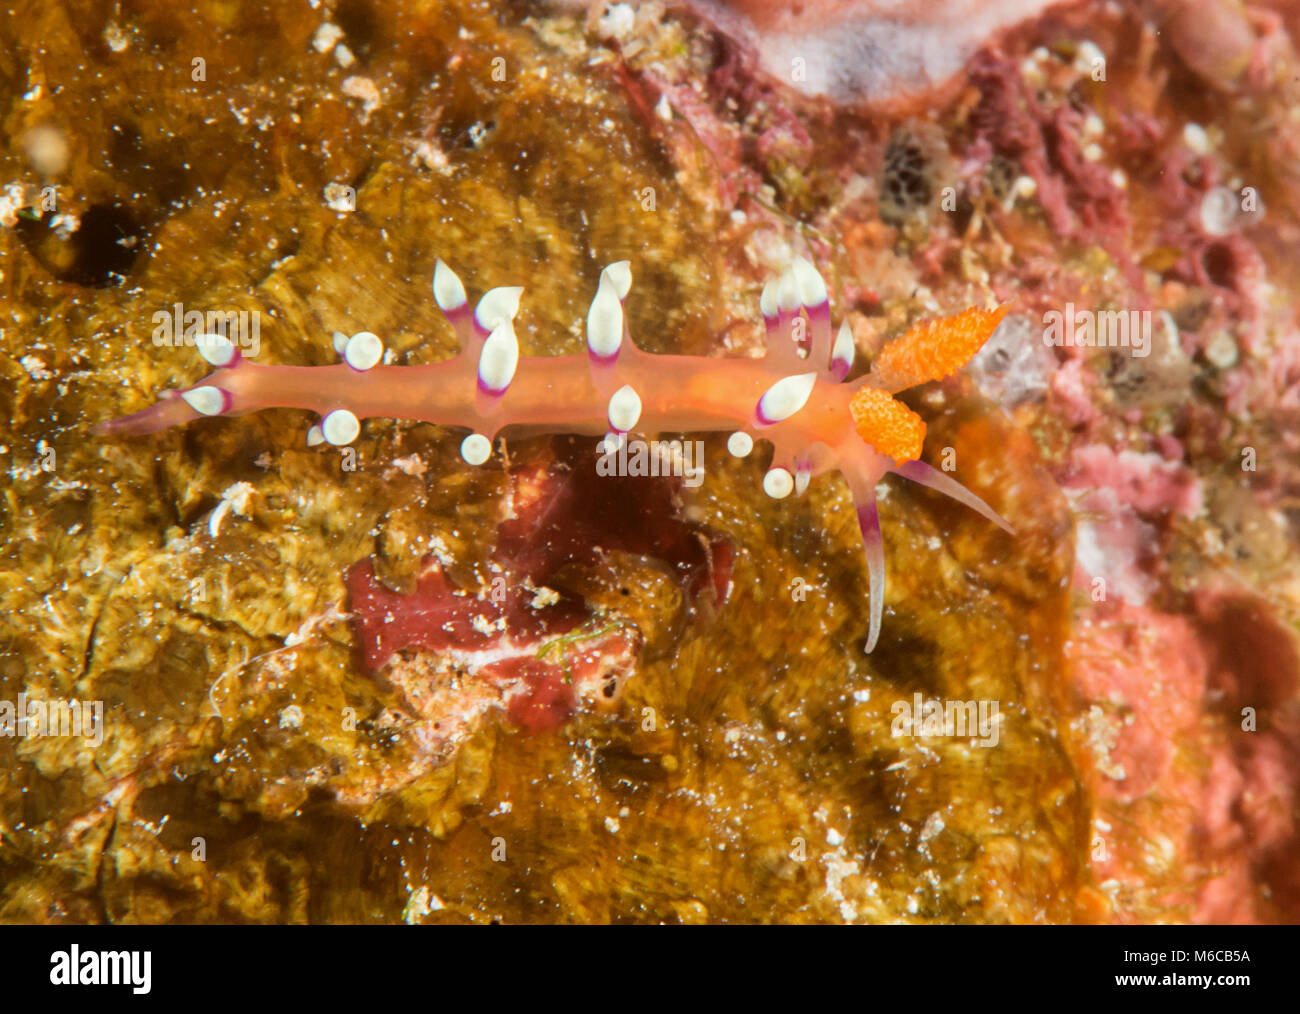 Much-desired flabellina or desirable flabellina ( Flabellina exoptata ) crawling on coral reef of Bali, Indonesia Stock Photo